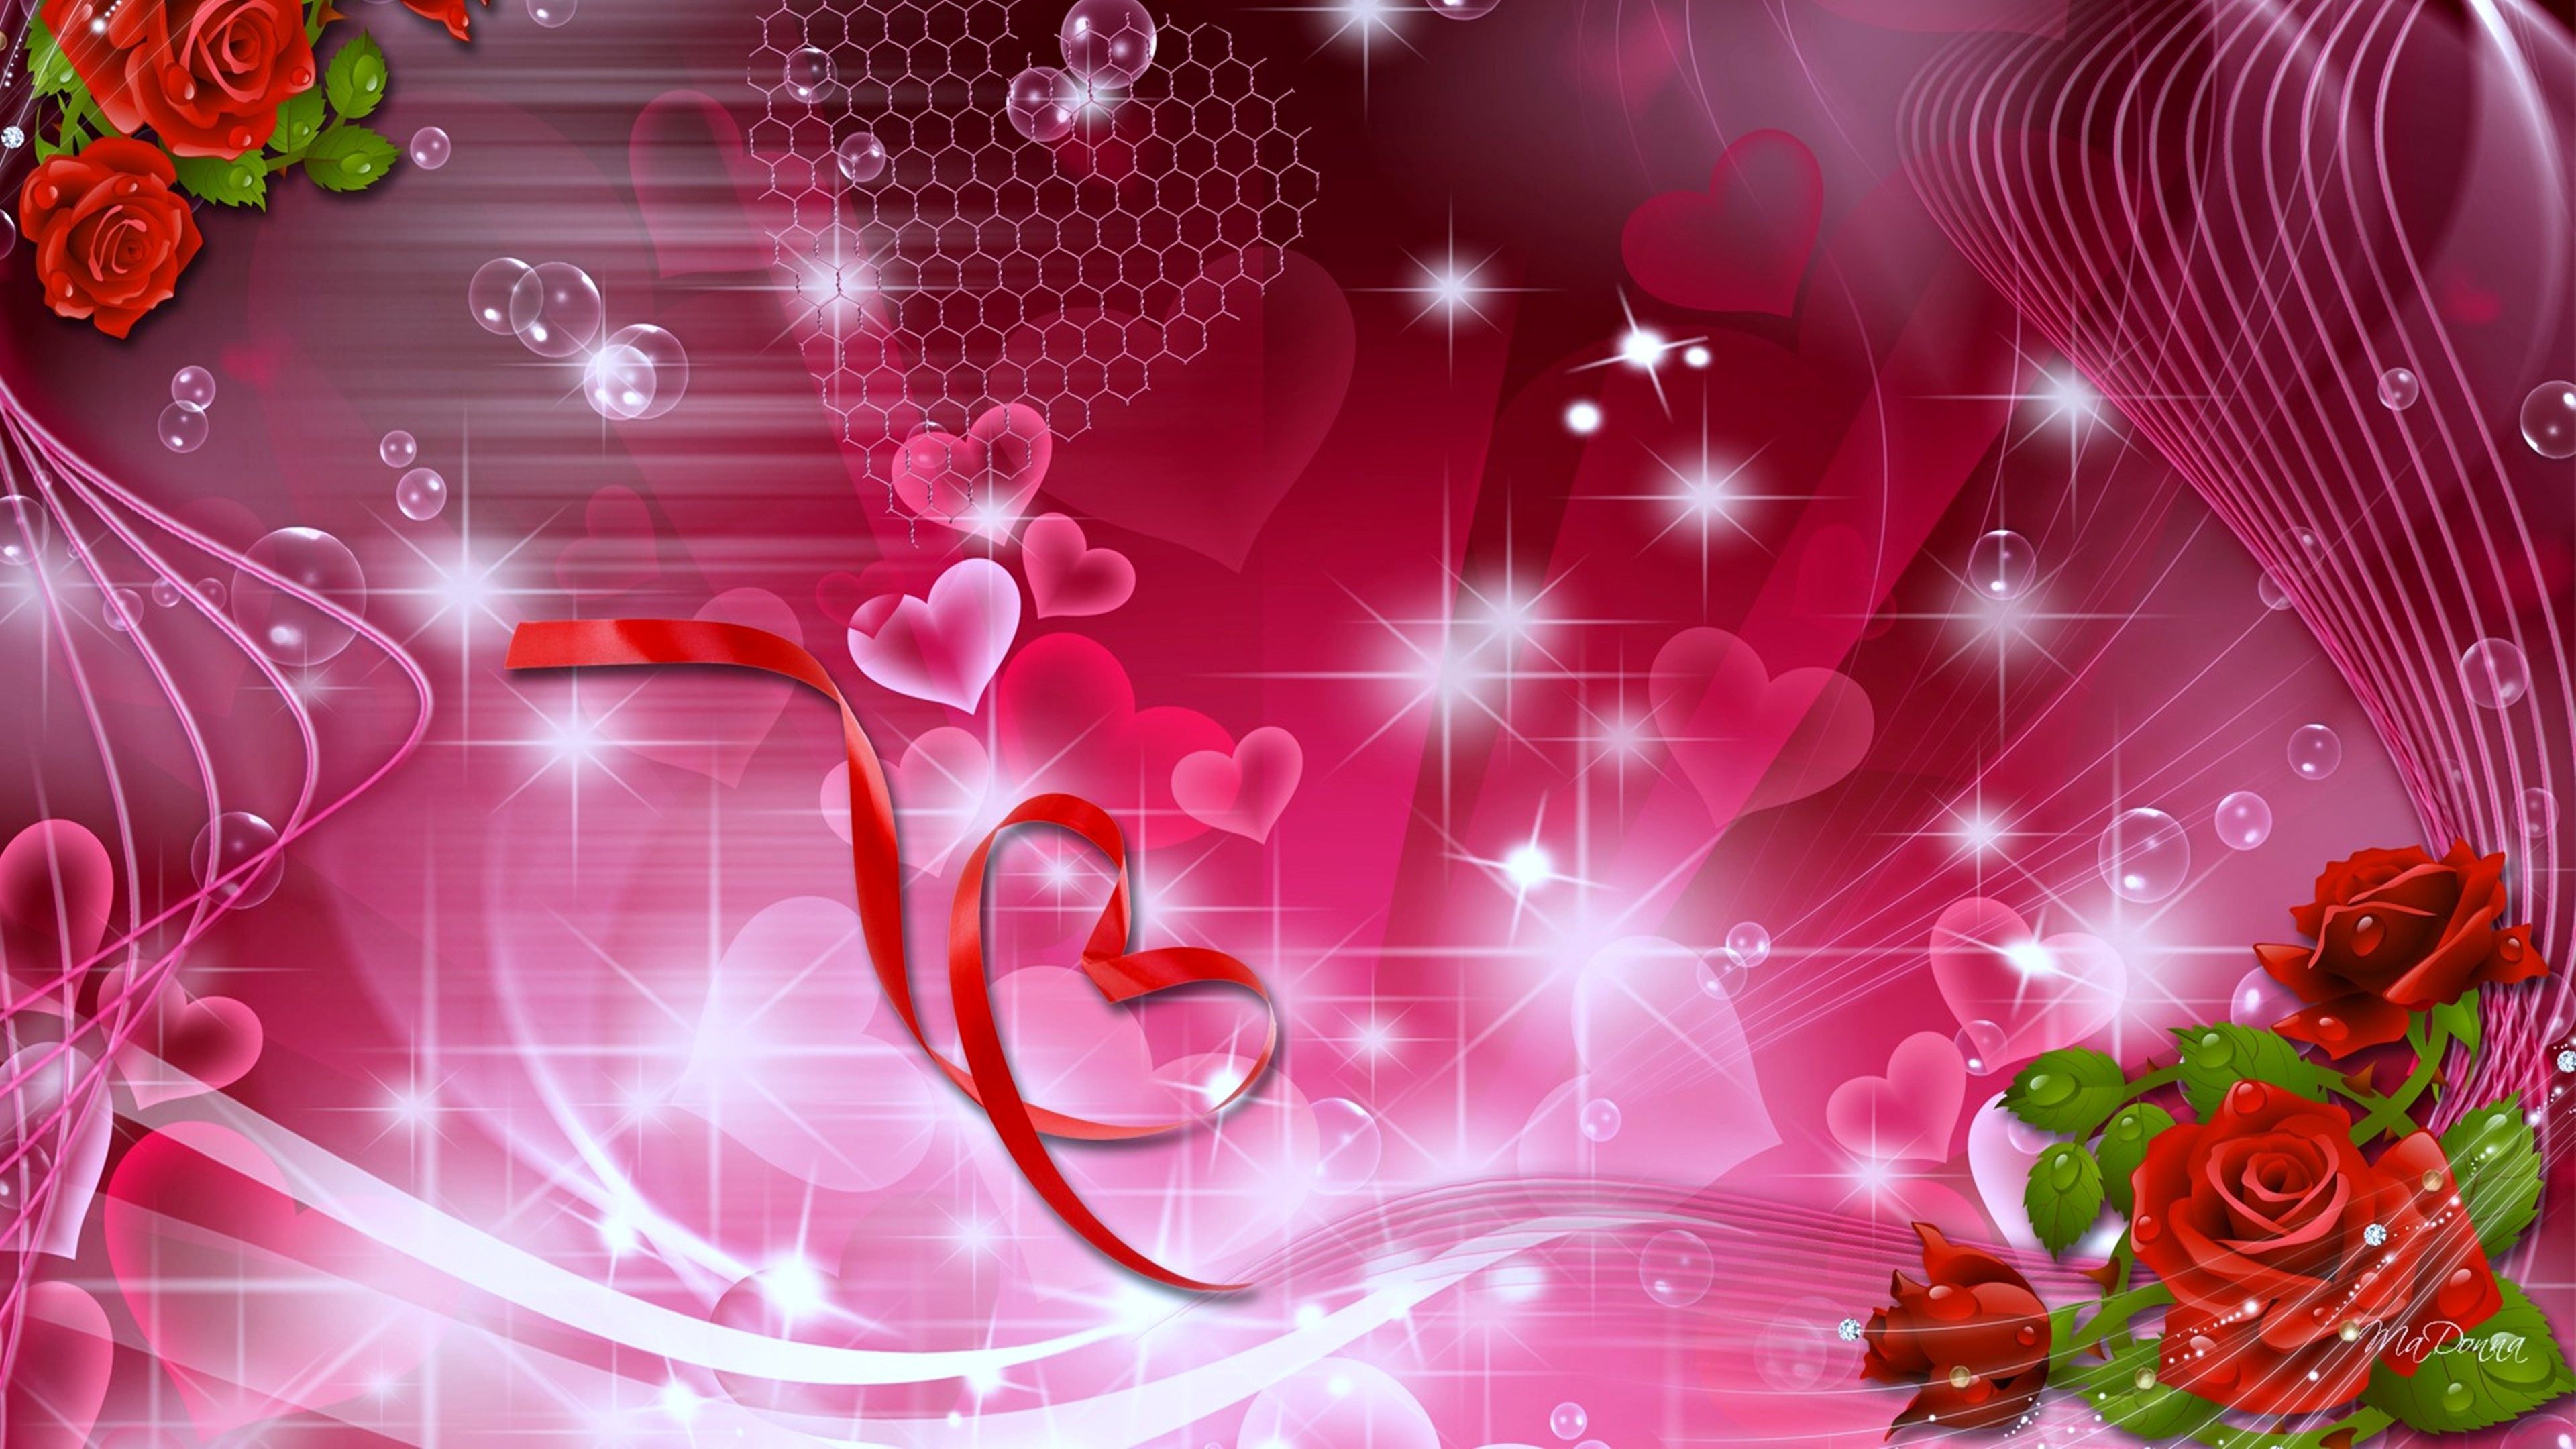 Love Backgrounds Wallpaper (62+ images)